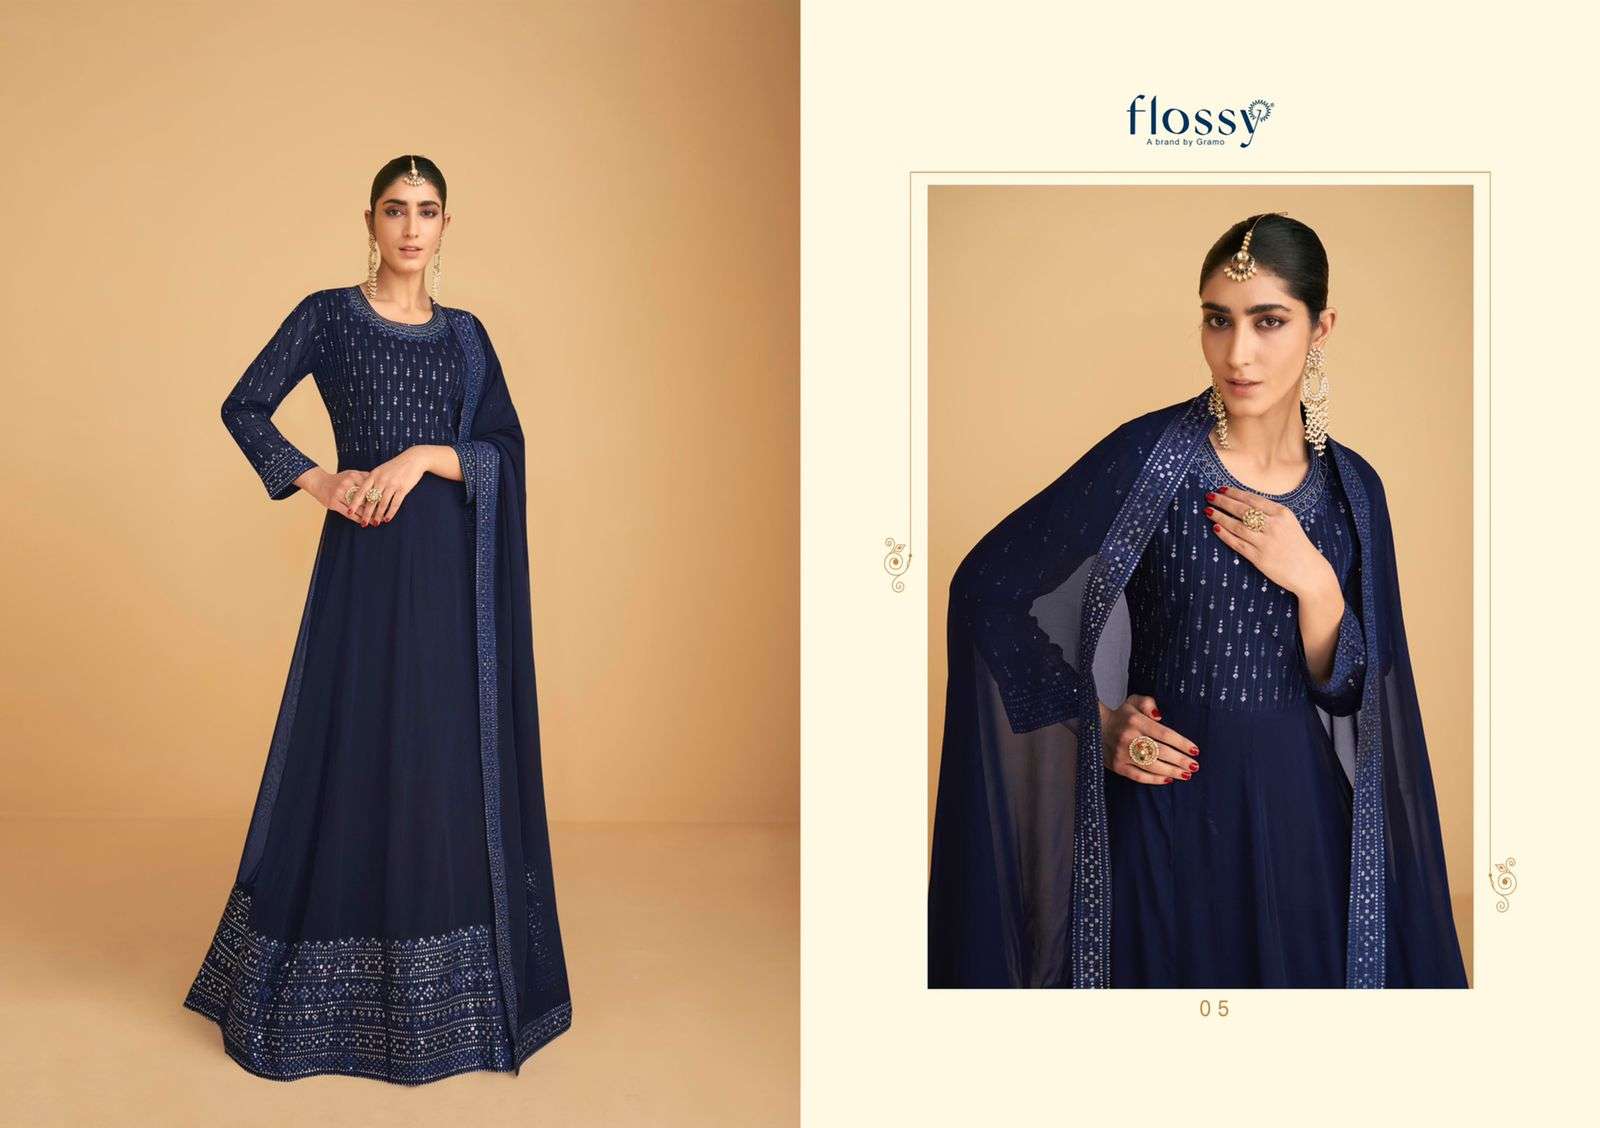 PANIHARI VOL-1 BY FLOSSY 05 TO 08 SERIES BEAUTIFUL SHARARA SUITS COLORFUL STYLISH FANCY CASUAL WEAR & ETHNIC WEAR REAL GEORGETTE EMBROIDERED DRESSES AT WHOLESALE PRICE